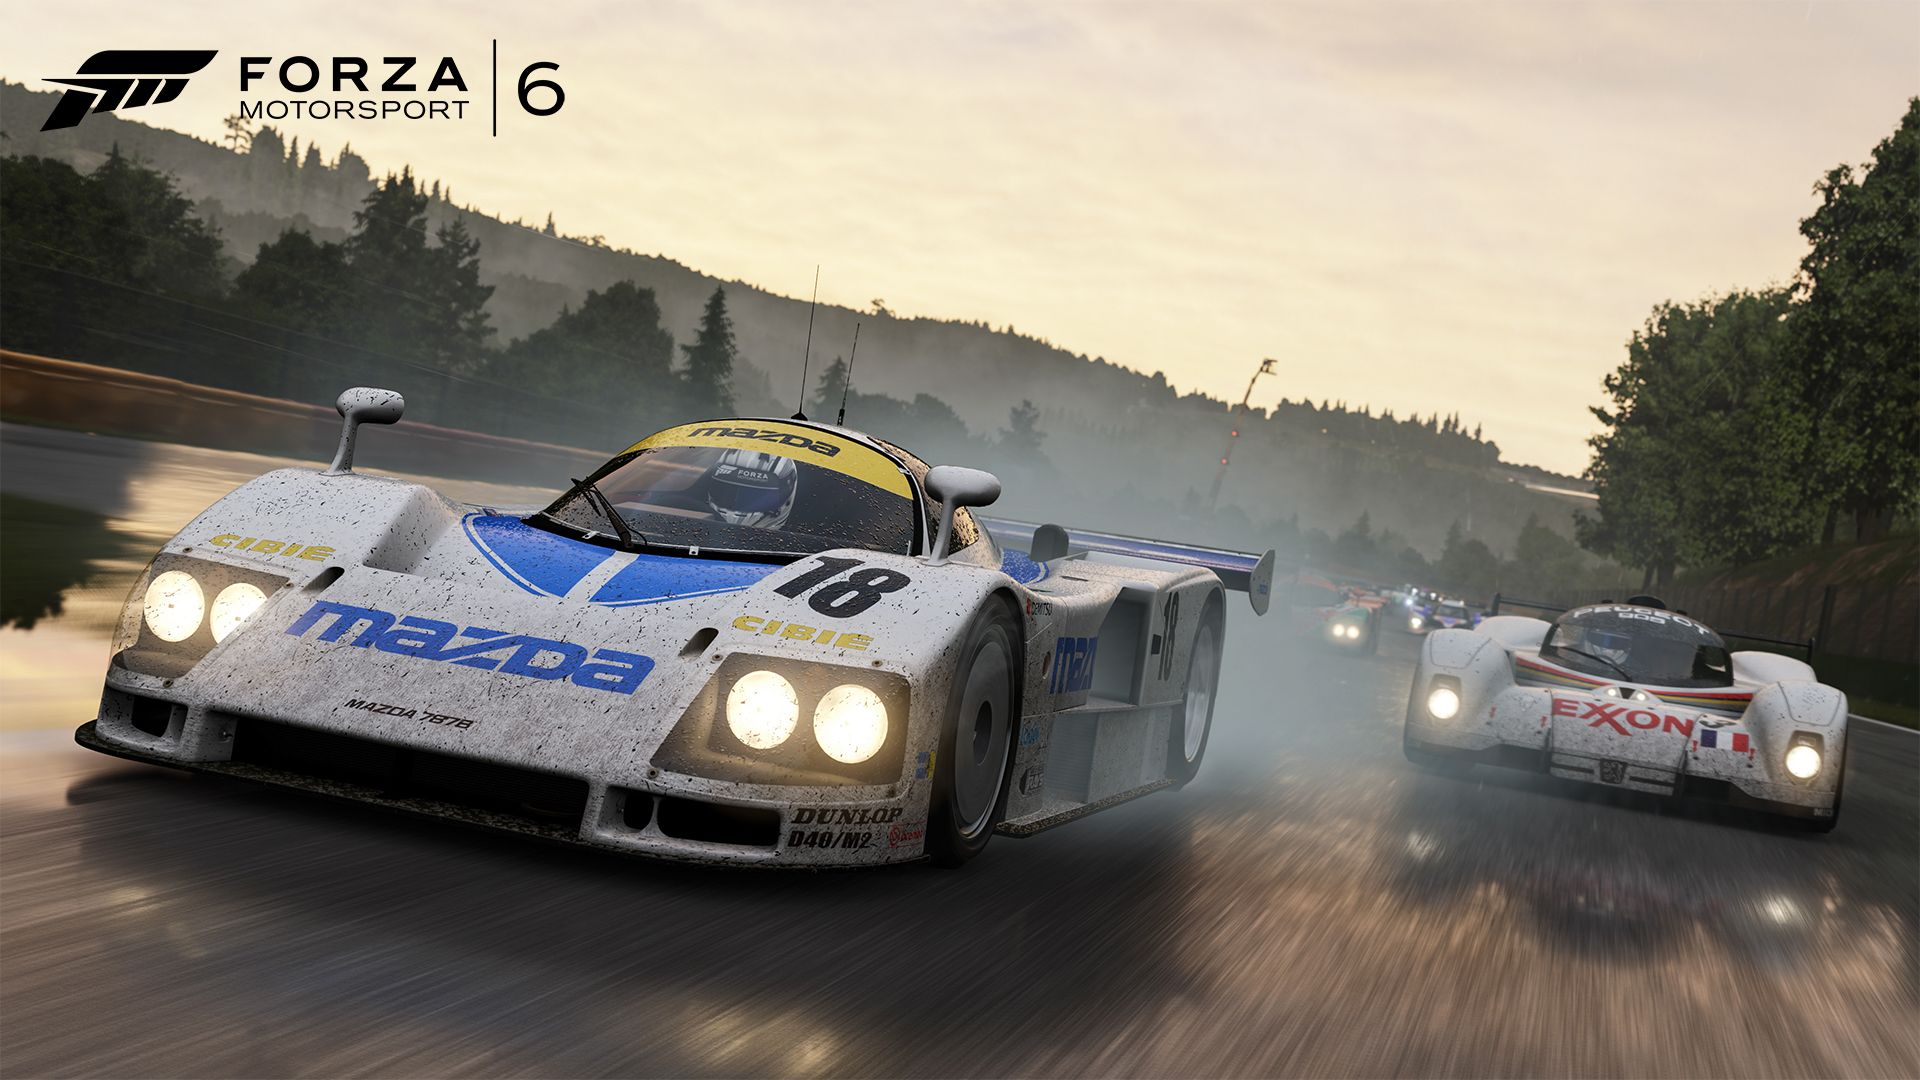 Buckle up Xbox players, Forza Motorsport's download size is massive